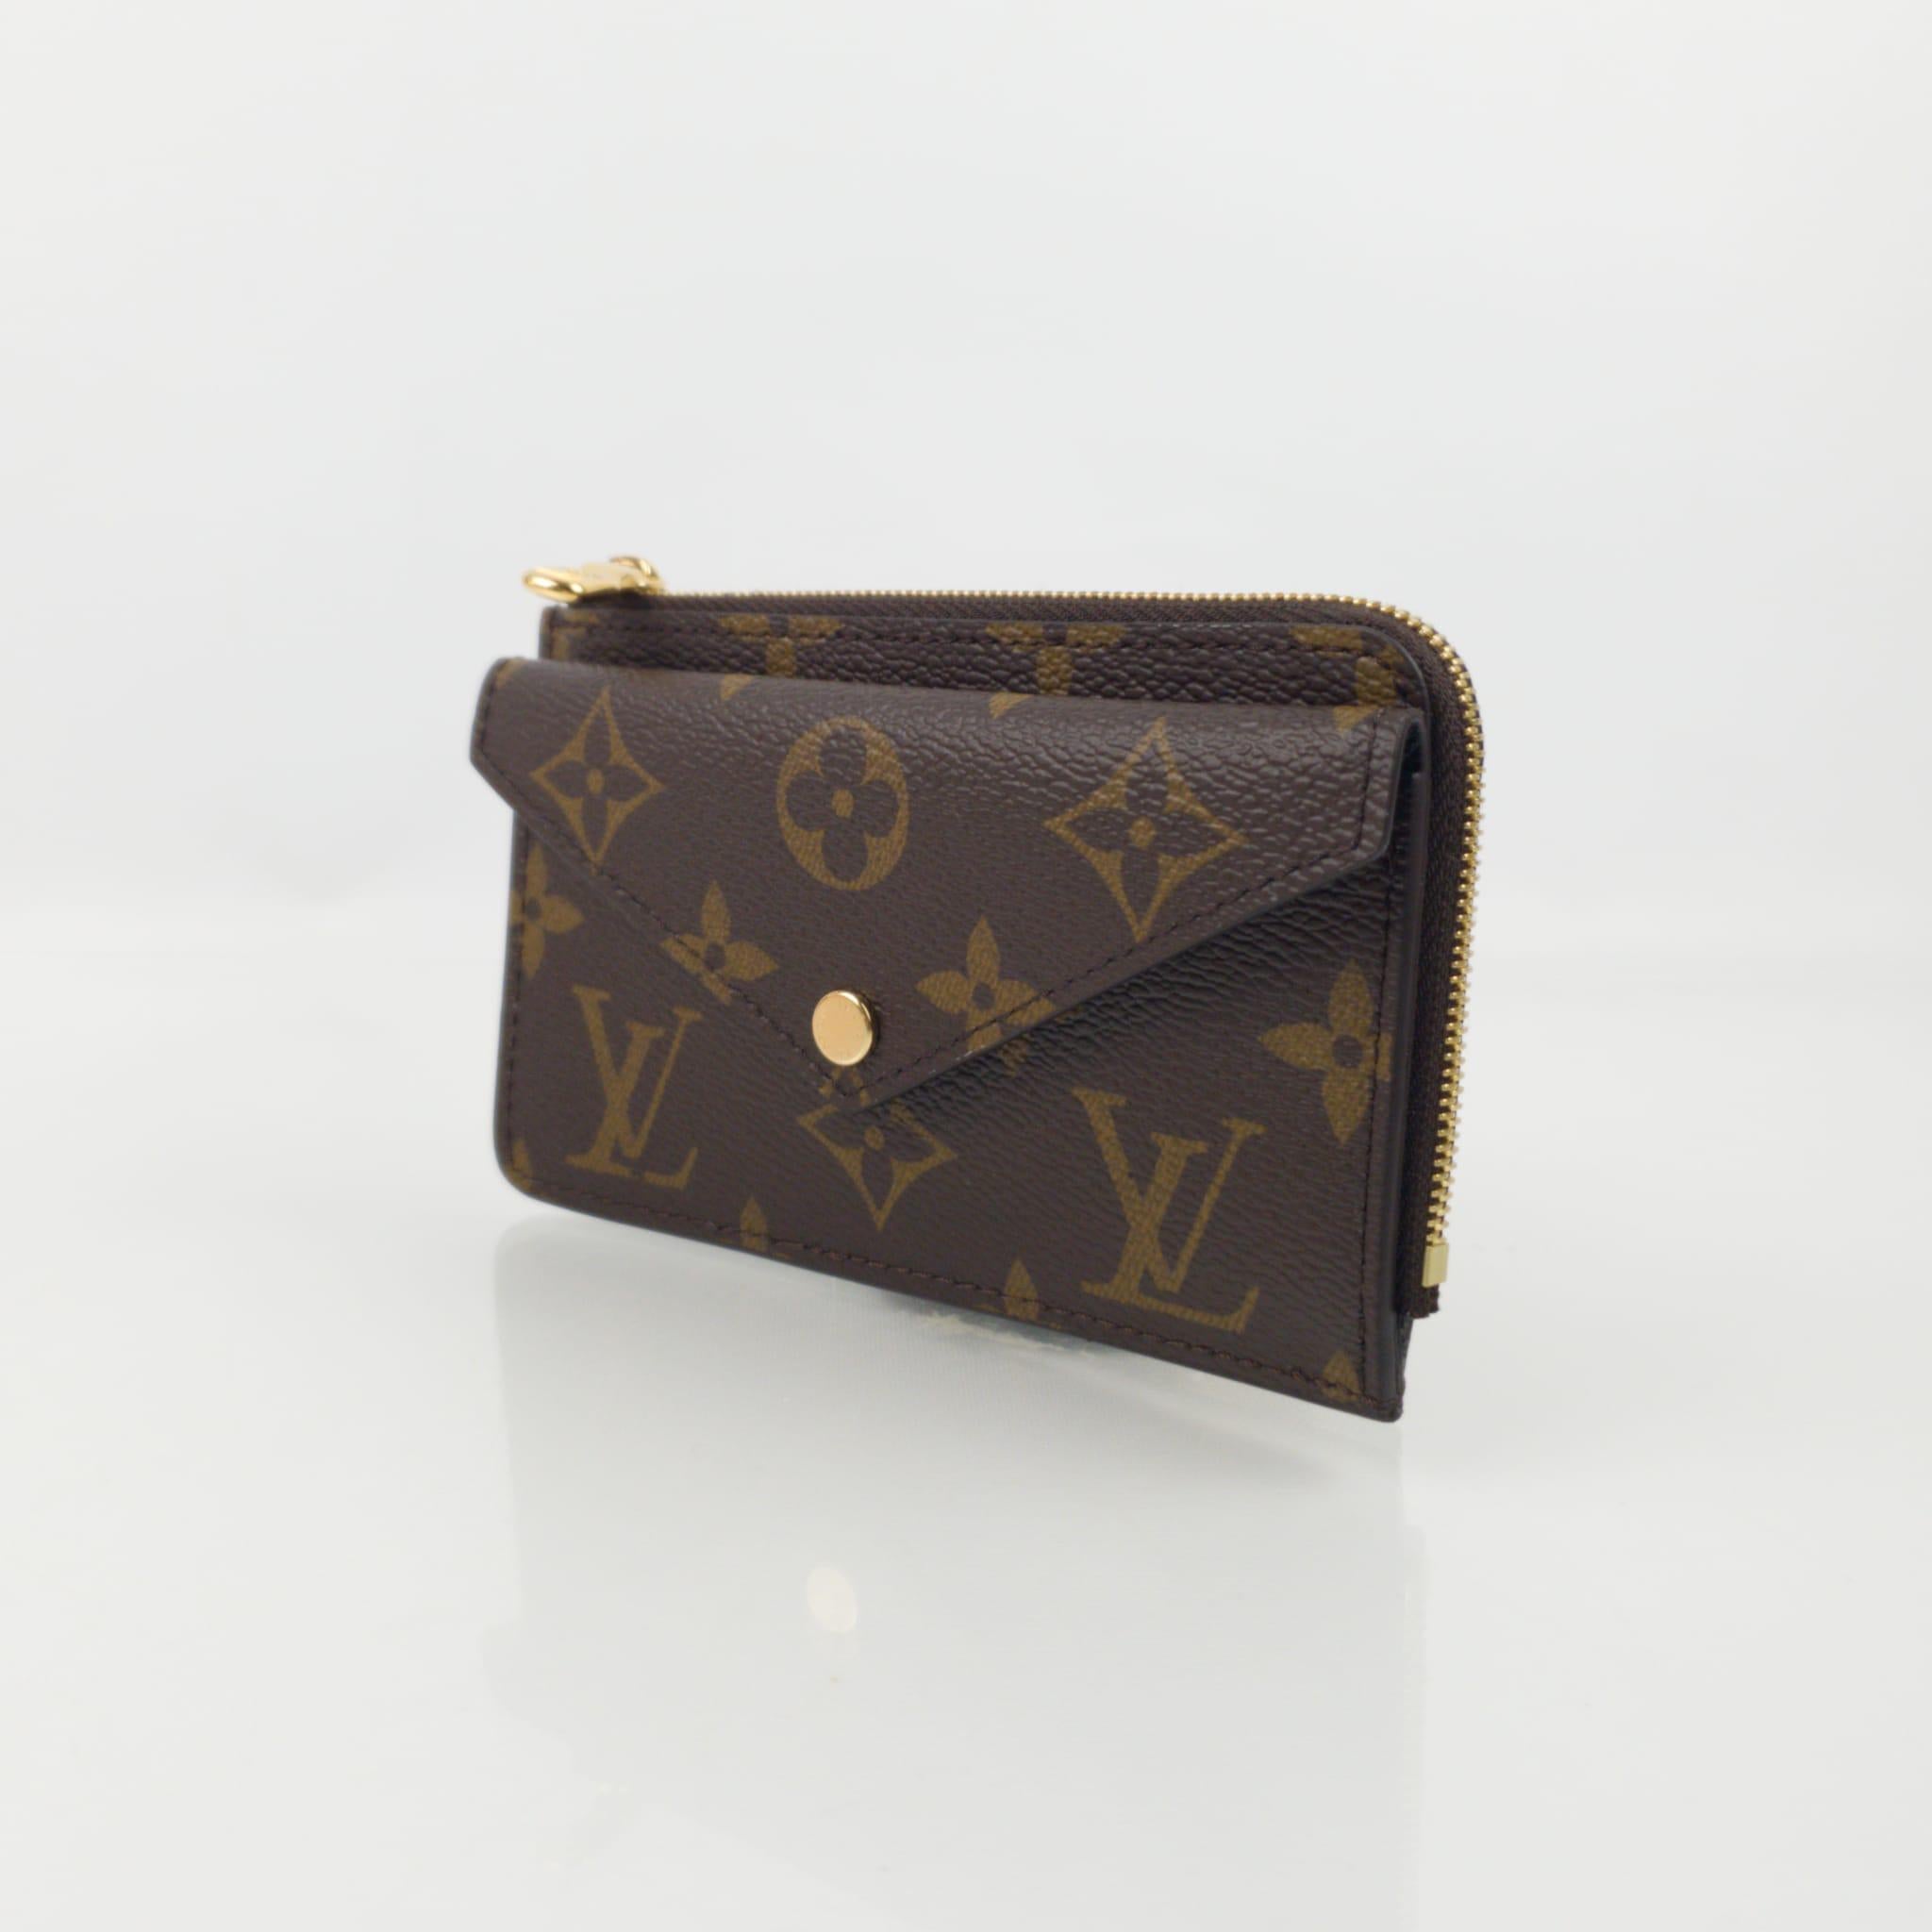 Black
Monogram canvas
Cowhide trim
Cowhide lining
Gold metallic finishes
L-shaped zipper
Snap button closure
Front pocket
Intermediate flat pocket
Three card slots
chain with hook
Flat pocket on the back